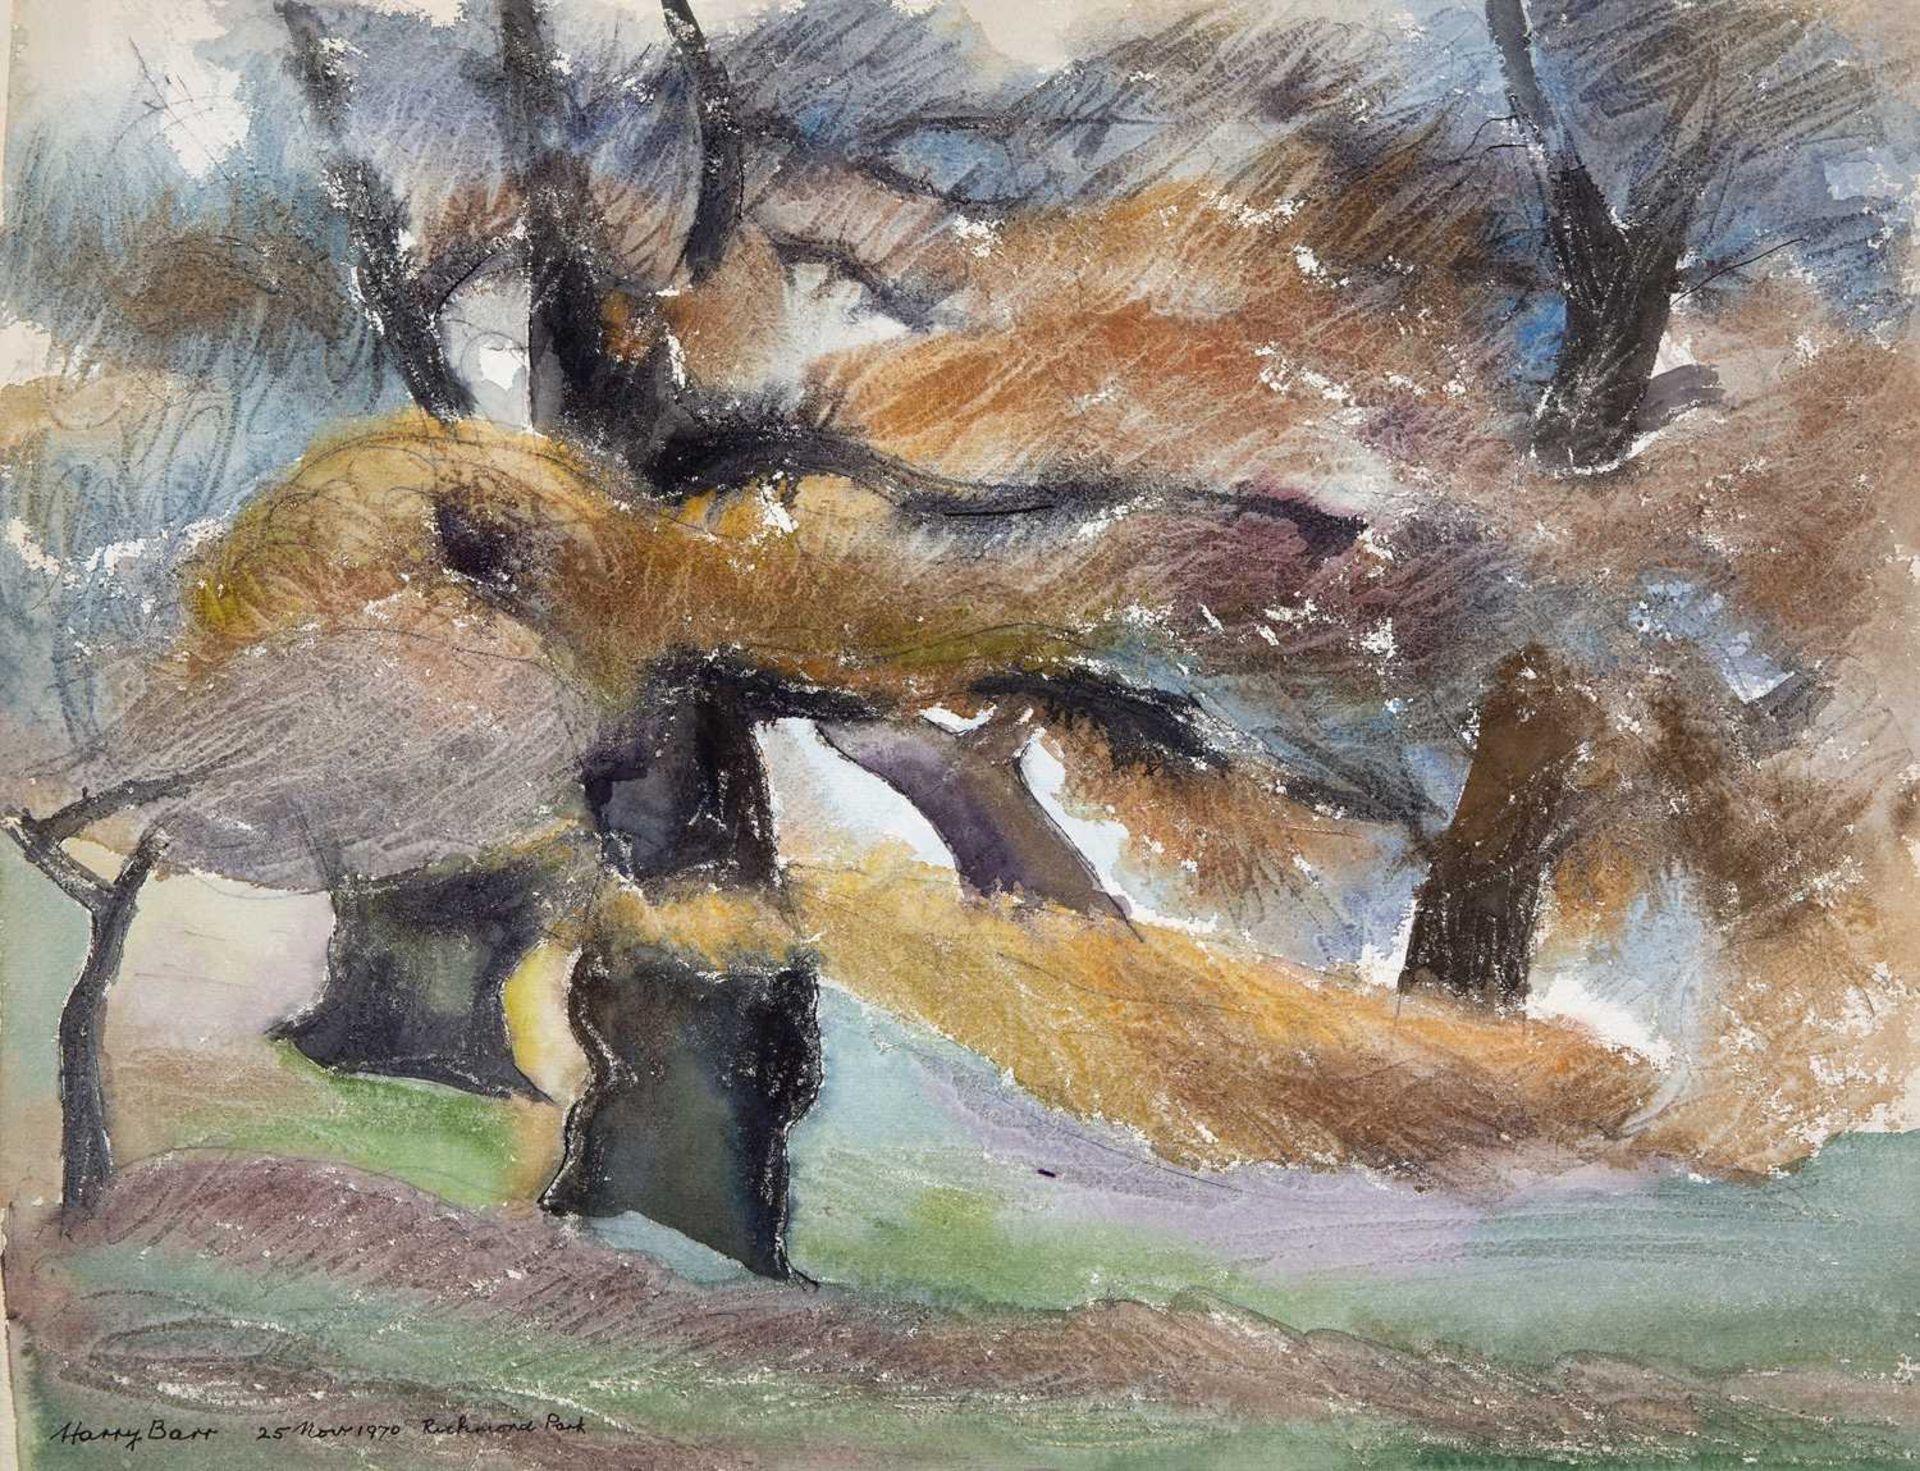 Harry Barr (1896-1987) ‘Richmond Park’, signed, inscribed and dated 25 Nov. 1970, pencil and